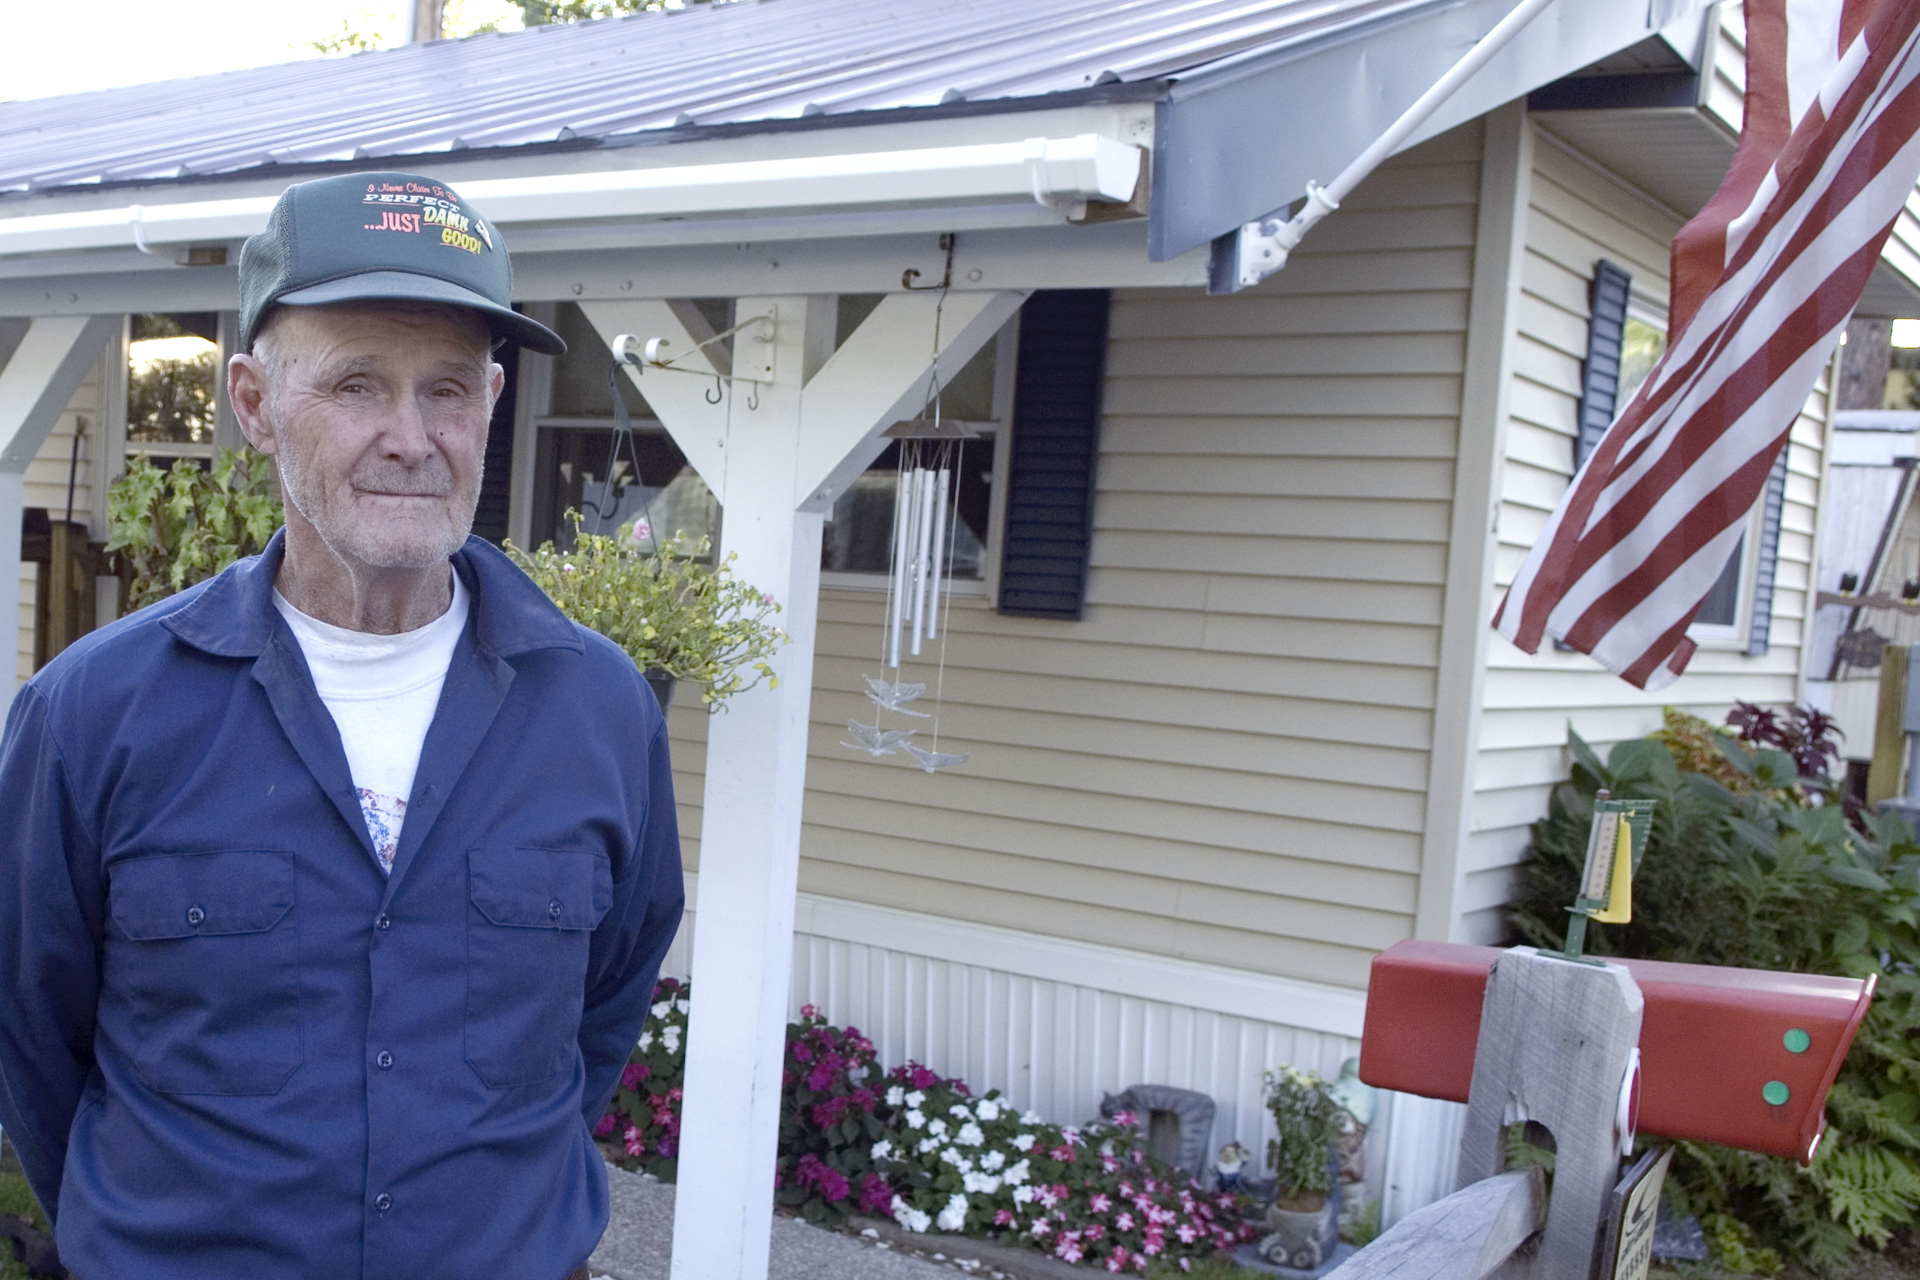 Man stands with manufactured home in background